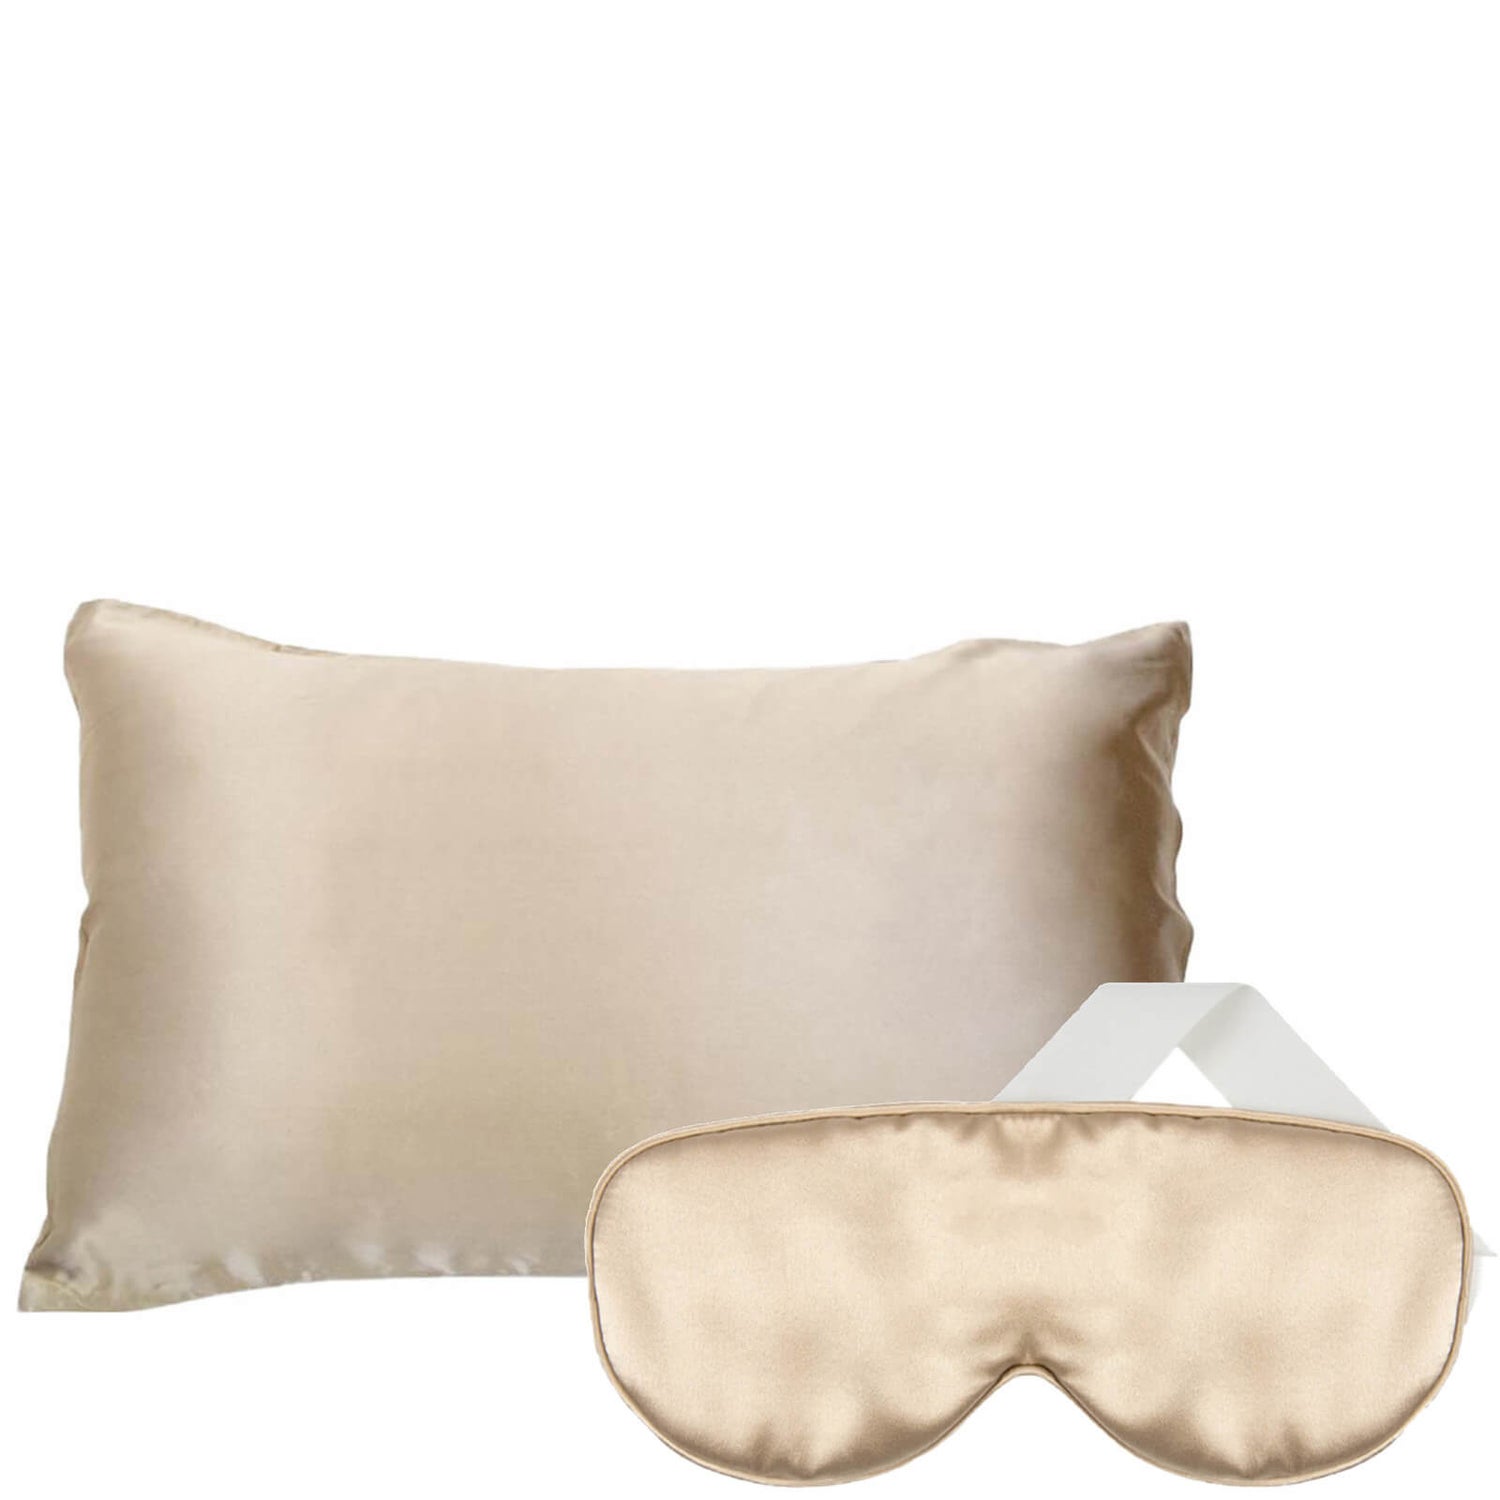 The Goodnight Co. Silk Sleep Mask and Queen Size Pillowcase - Gold (Worth $140.00)